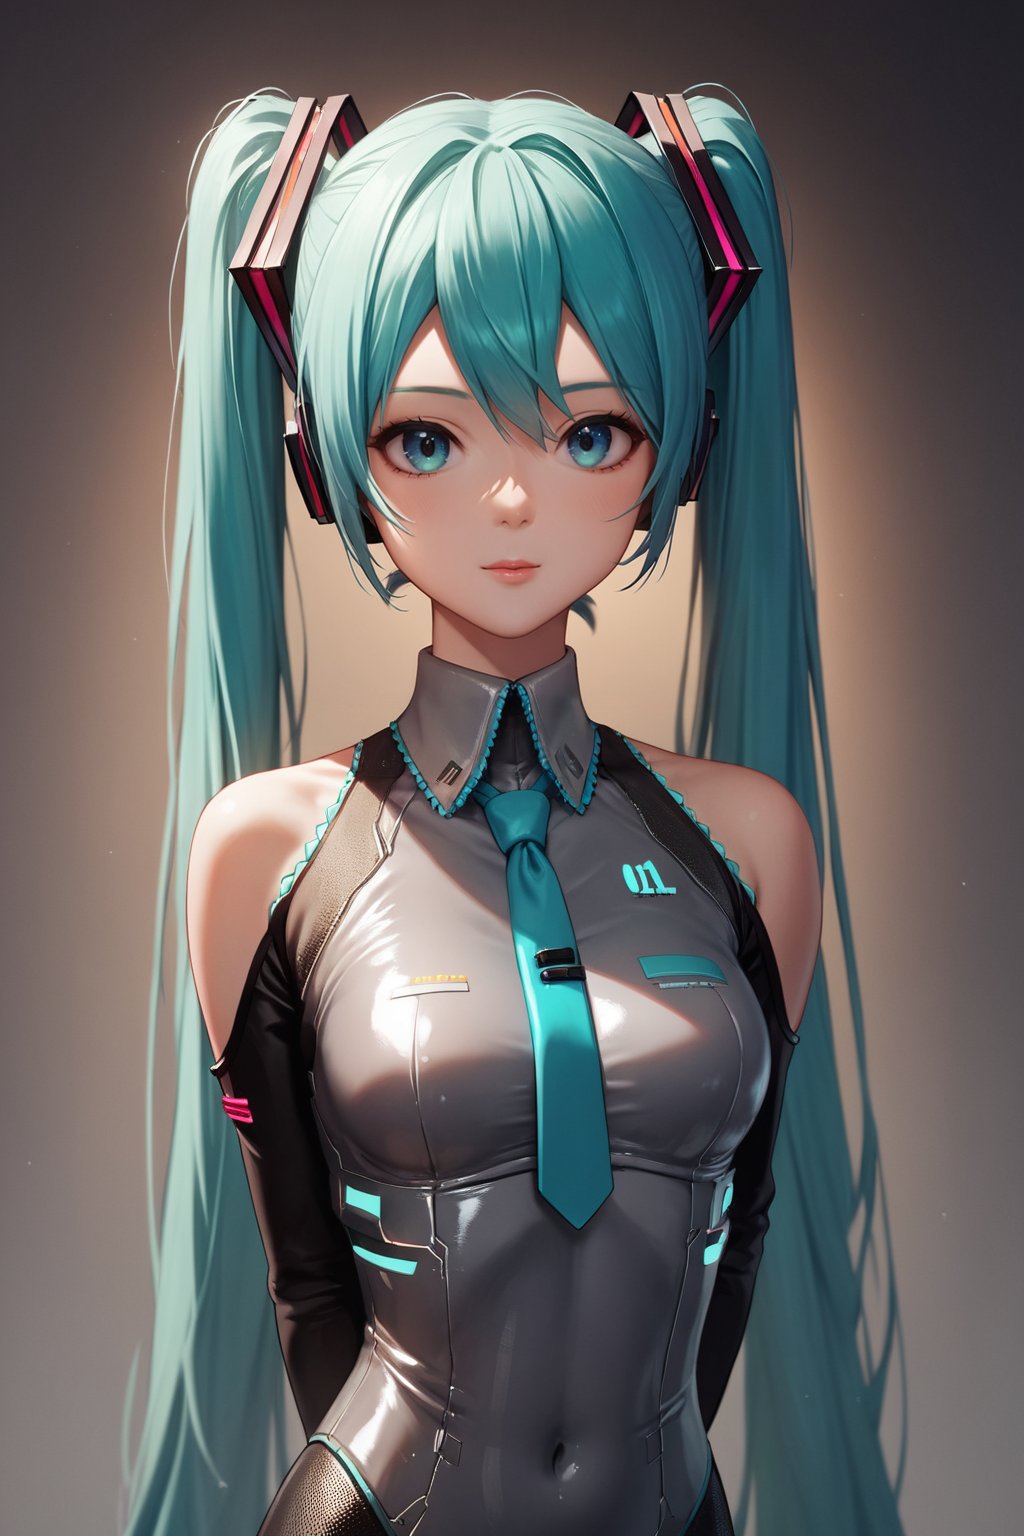 score_9, score_8_up, score_7_up, score_6_up, score_5_up, score_4_up, 
Source_Anime, Source_Japanese anime, Source_Pro anime, FuturEvoLab-Lora-mecha, 
masterpiece, best quality, hatsune miku, (mecha suit:0.8), tight suit, upper body, closed mouth, looking at viewer, arms behind back, highres, 4k, 8k, intricate detail, cinematic lighting, amazing quality, amazing shading, soft lighting, Detailed Illustration, anime style, wallpaper,FuturEvoLab-lora-mecha